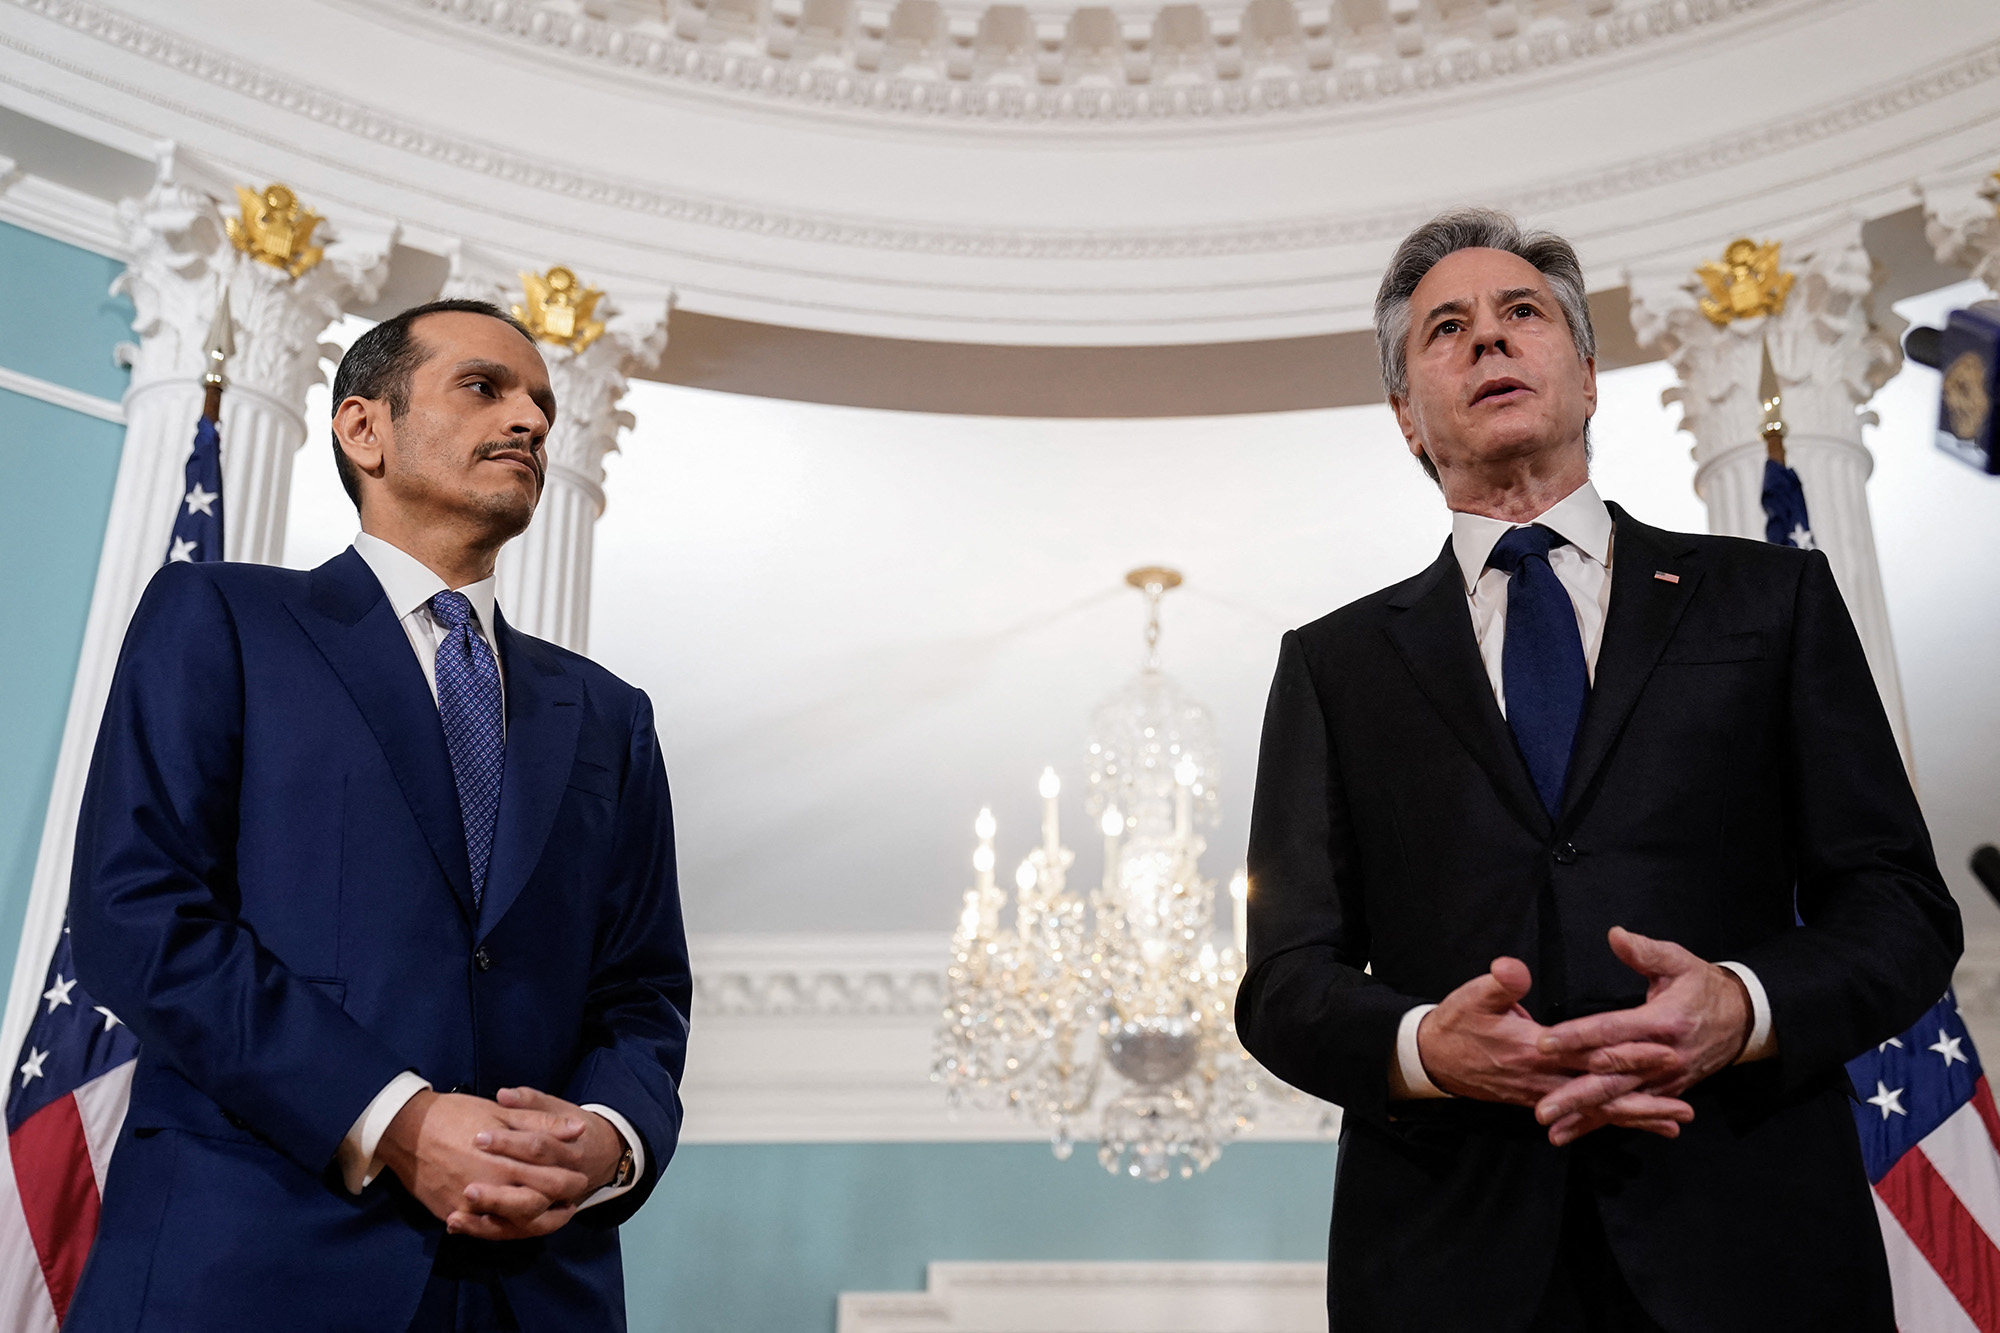 US Secretary of State Antony Blinken, right, and Qatari Prime Minister and Minister of Foreign Affairs Sheikh Mohammed bin Abdulrahman bin Jassim al-Thani speak to the press in the Treaty Room of the State Department in Washington, DC, on March 5.